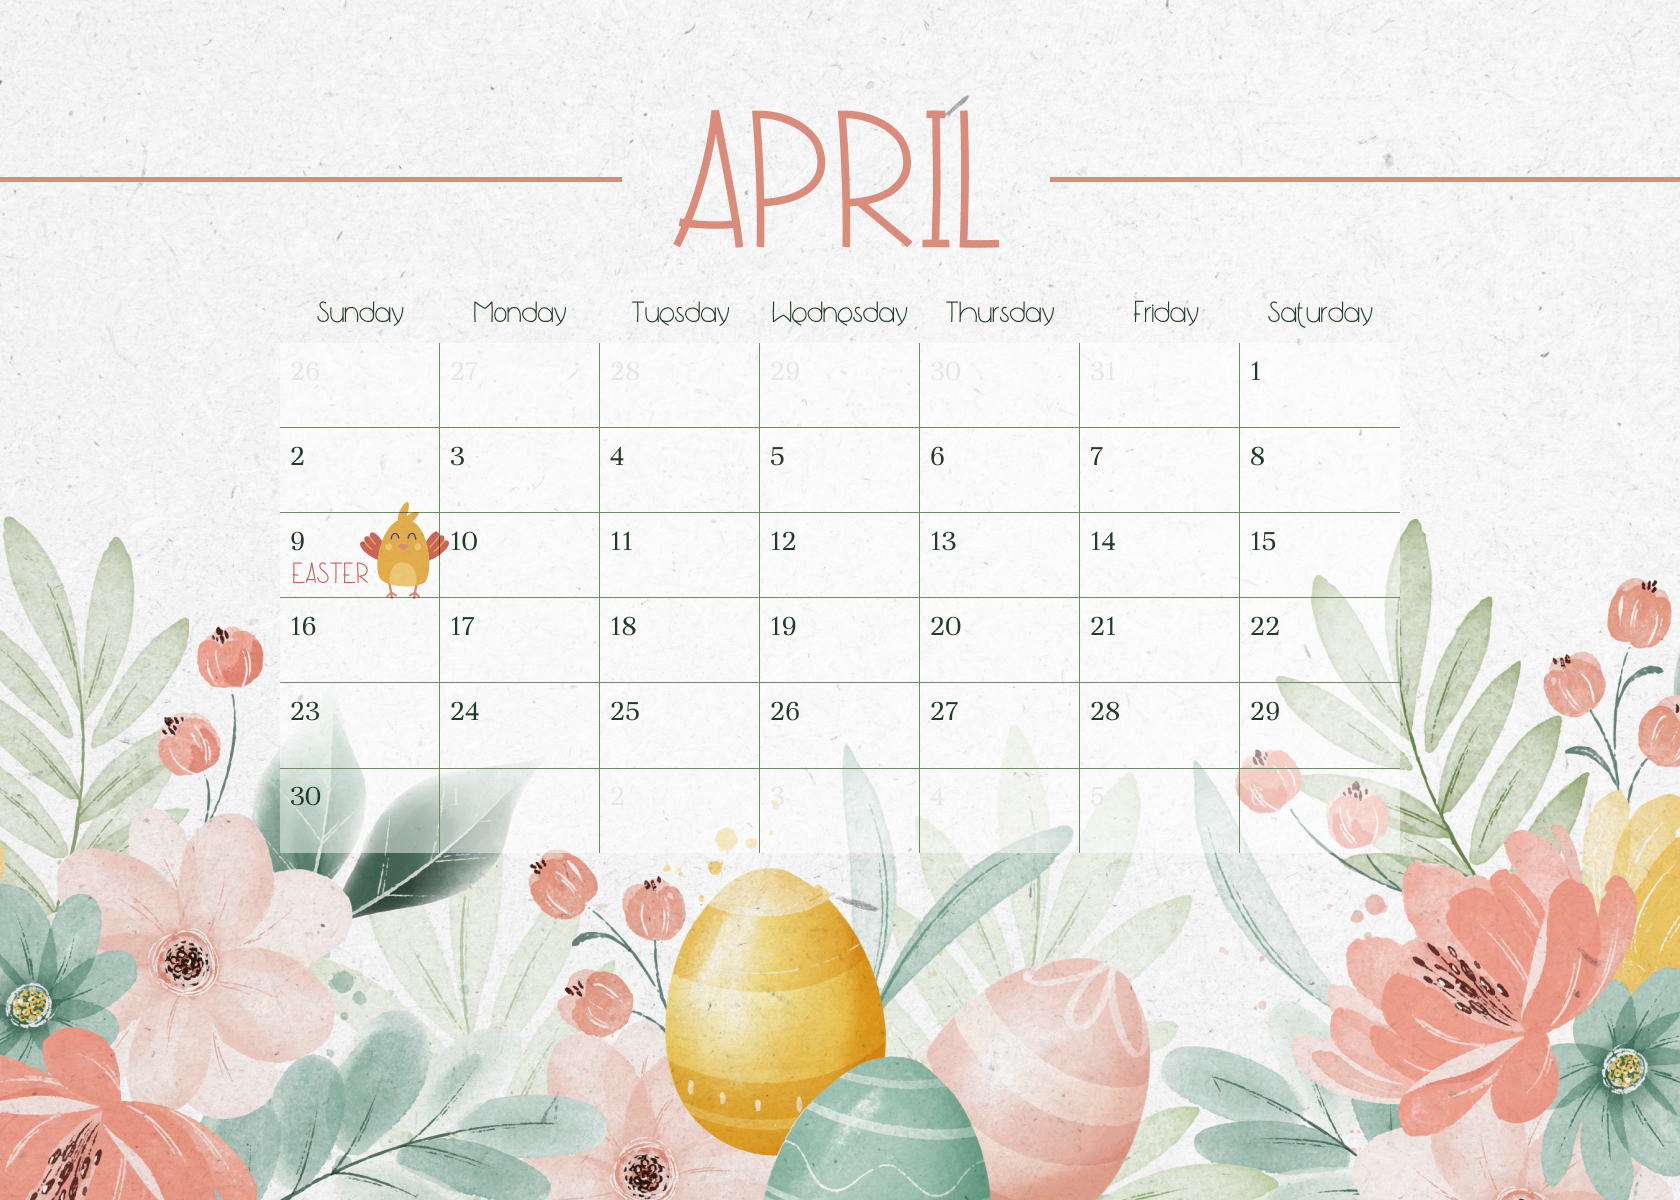 Calendar with flowers and leaves on it.